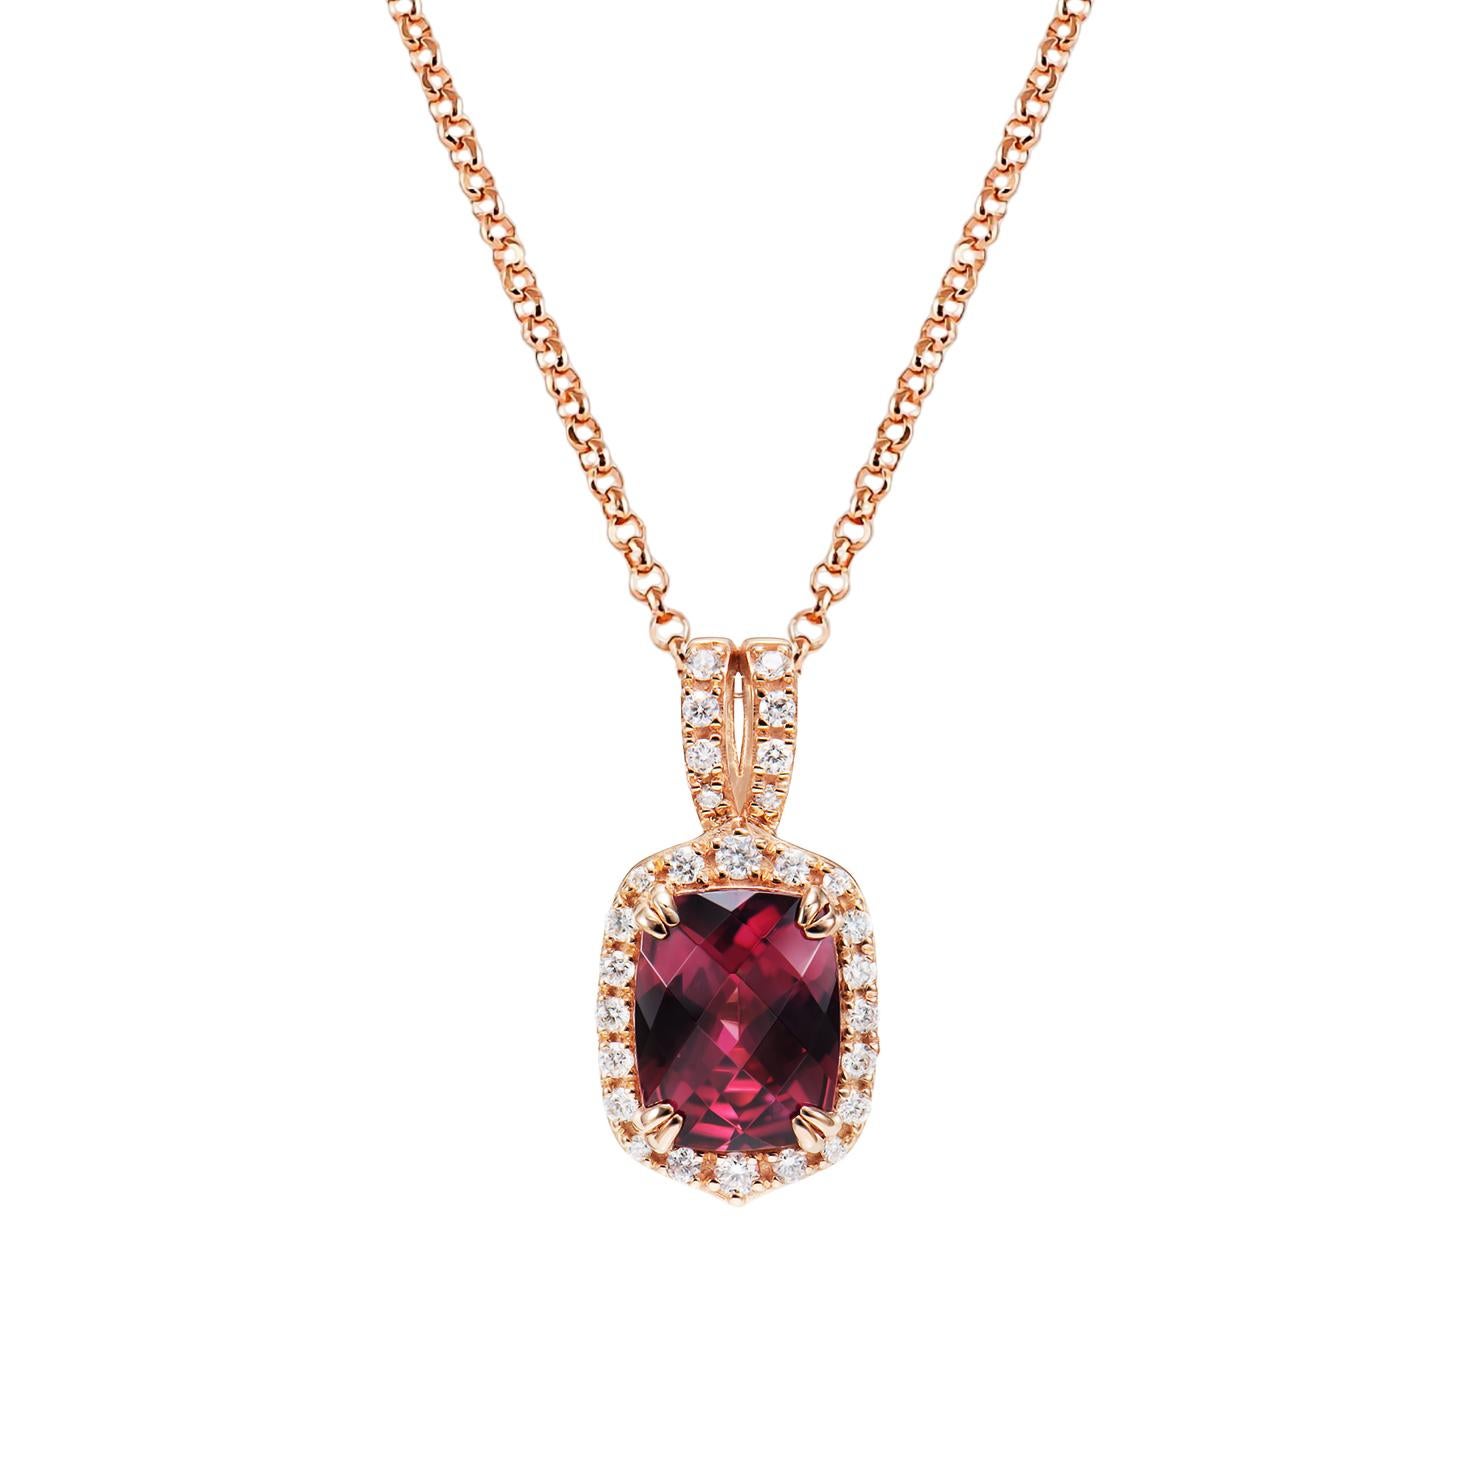 Celebrating Magenta as the color of the year for 2023, we present our exclusive Radiating Rhodolite collection. The magnificent magenta hues in these gems are brought to life in a classic rose gold setting with white diamonds.

Rhodolite Pendant in